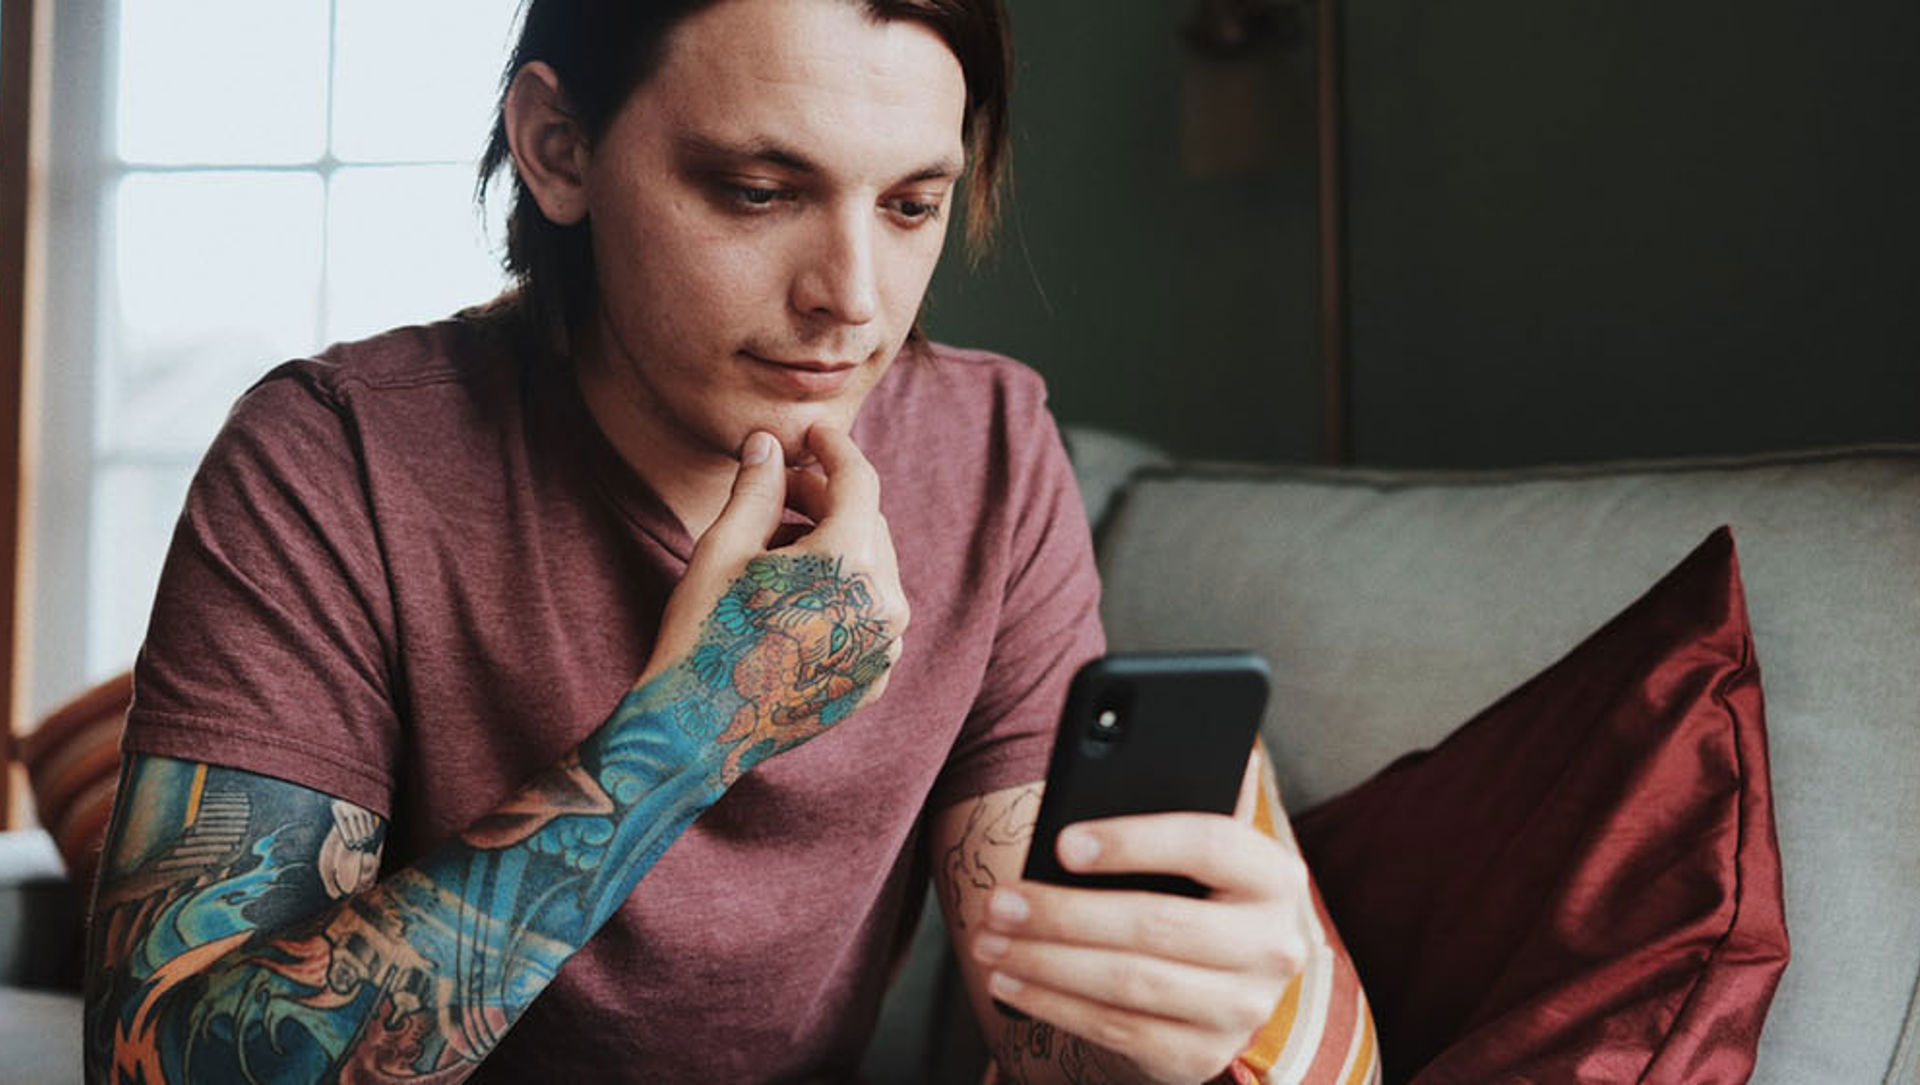 Man with sleeve tattoo looking at a mobile phone 